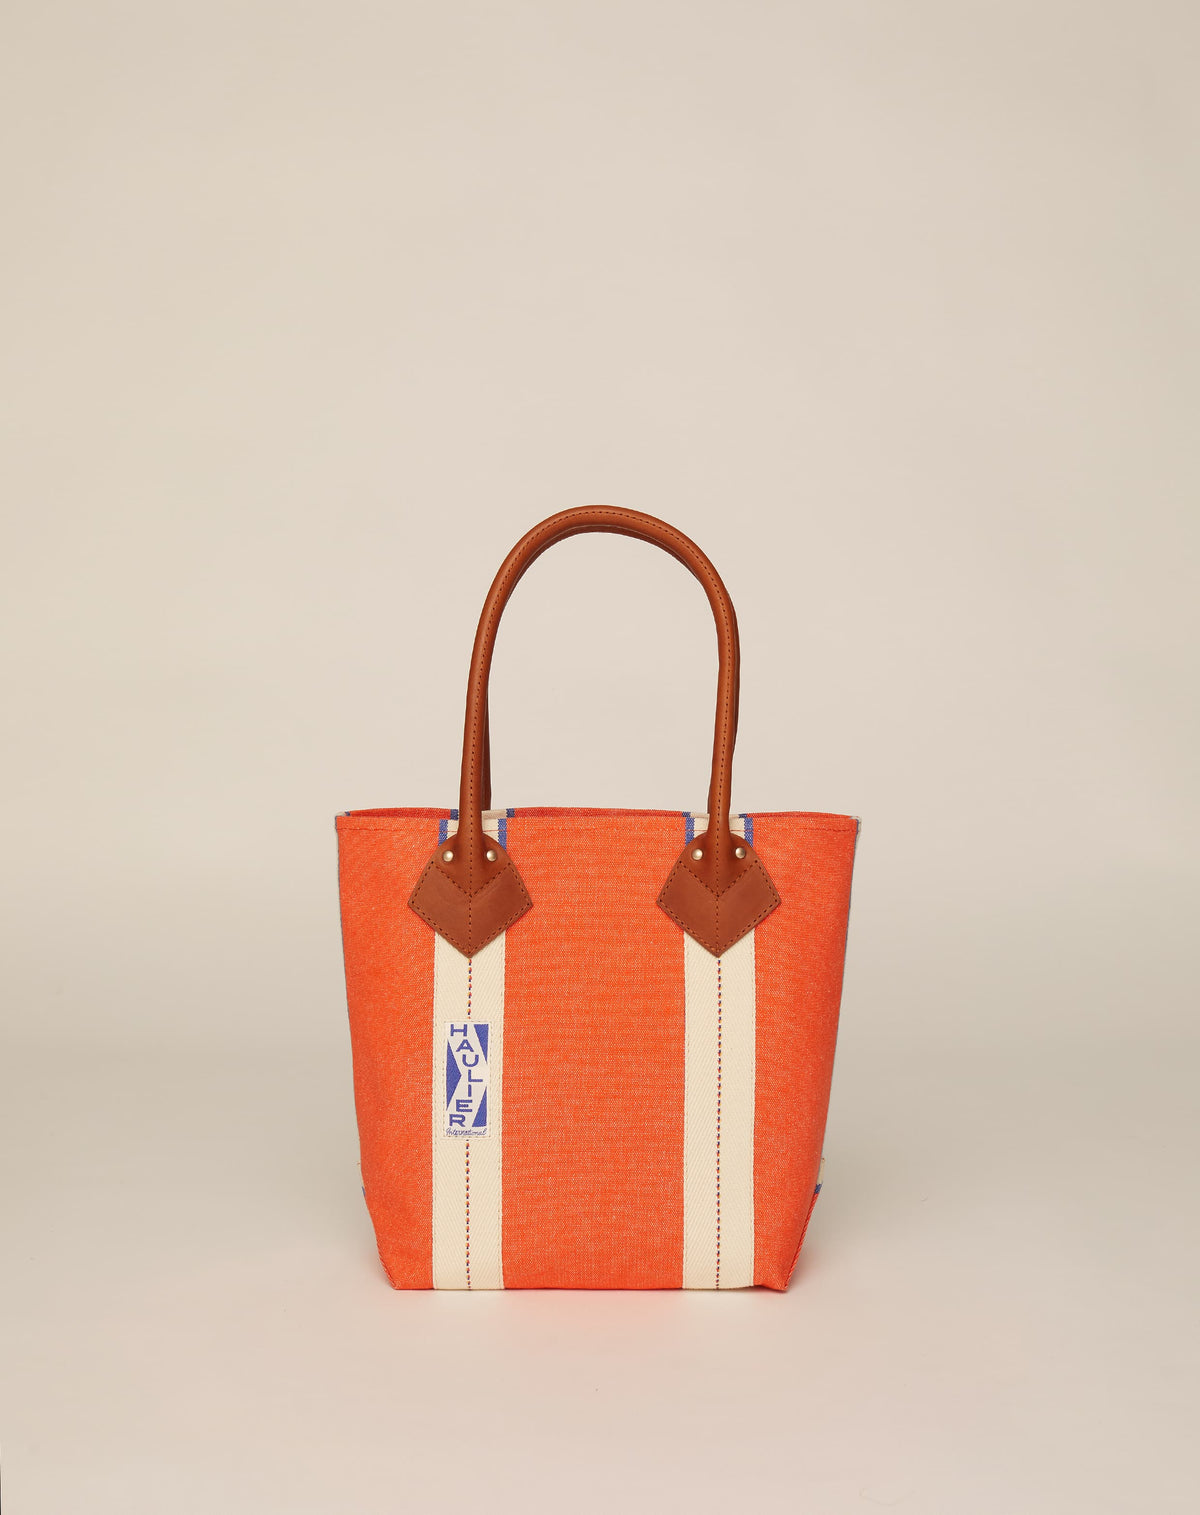 Image of small classic canvas tote bag in orange colour with tan leather handles and contrasting stripes.